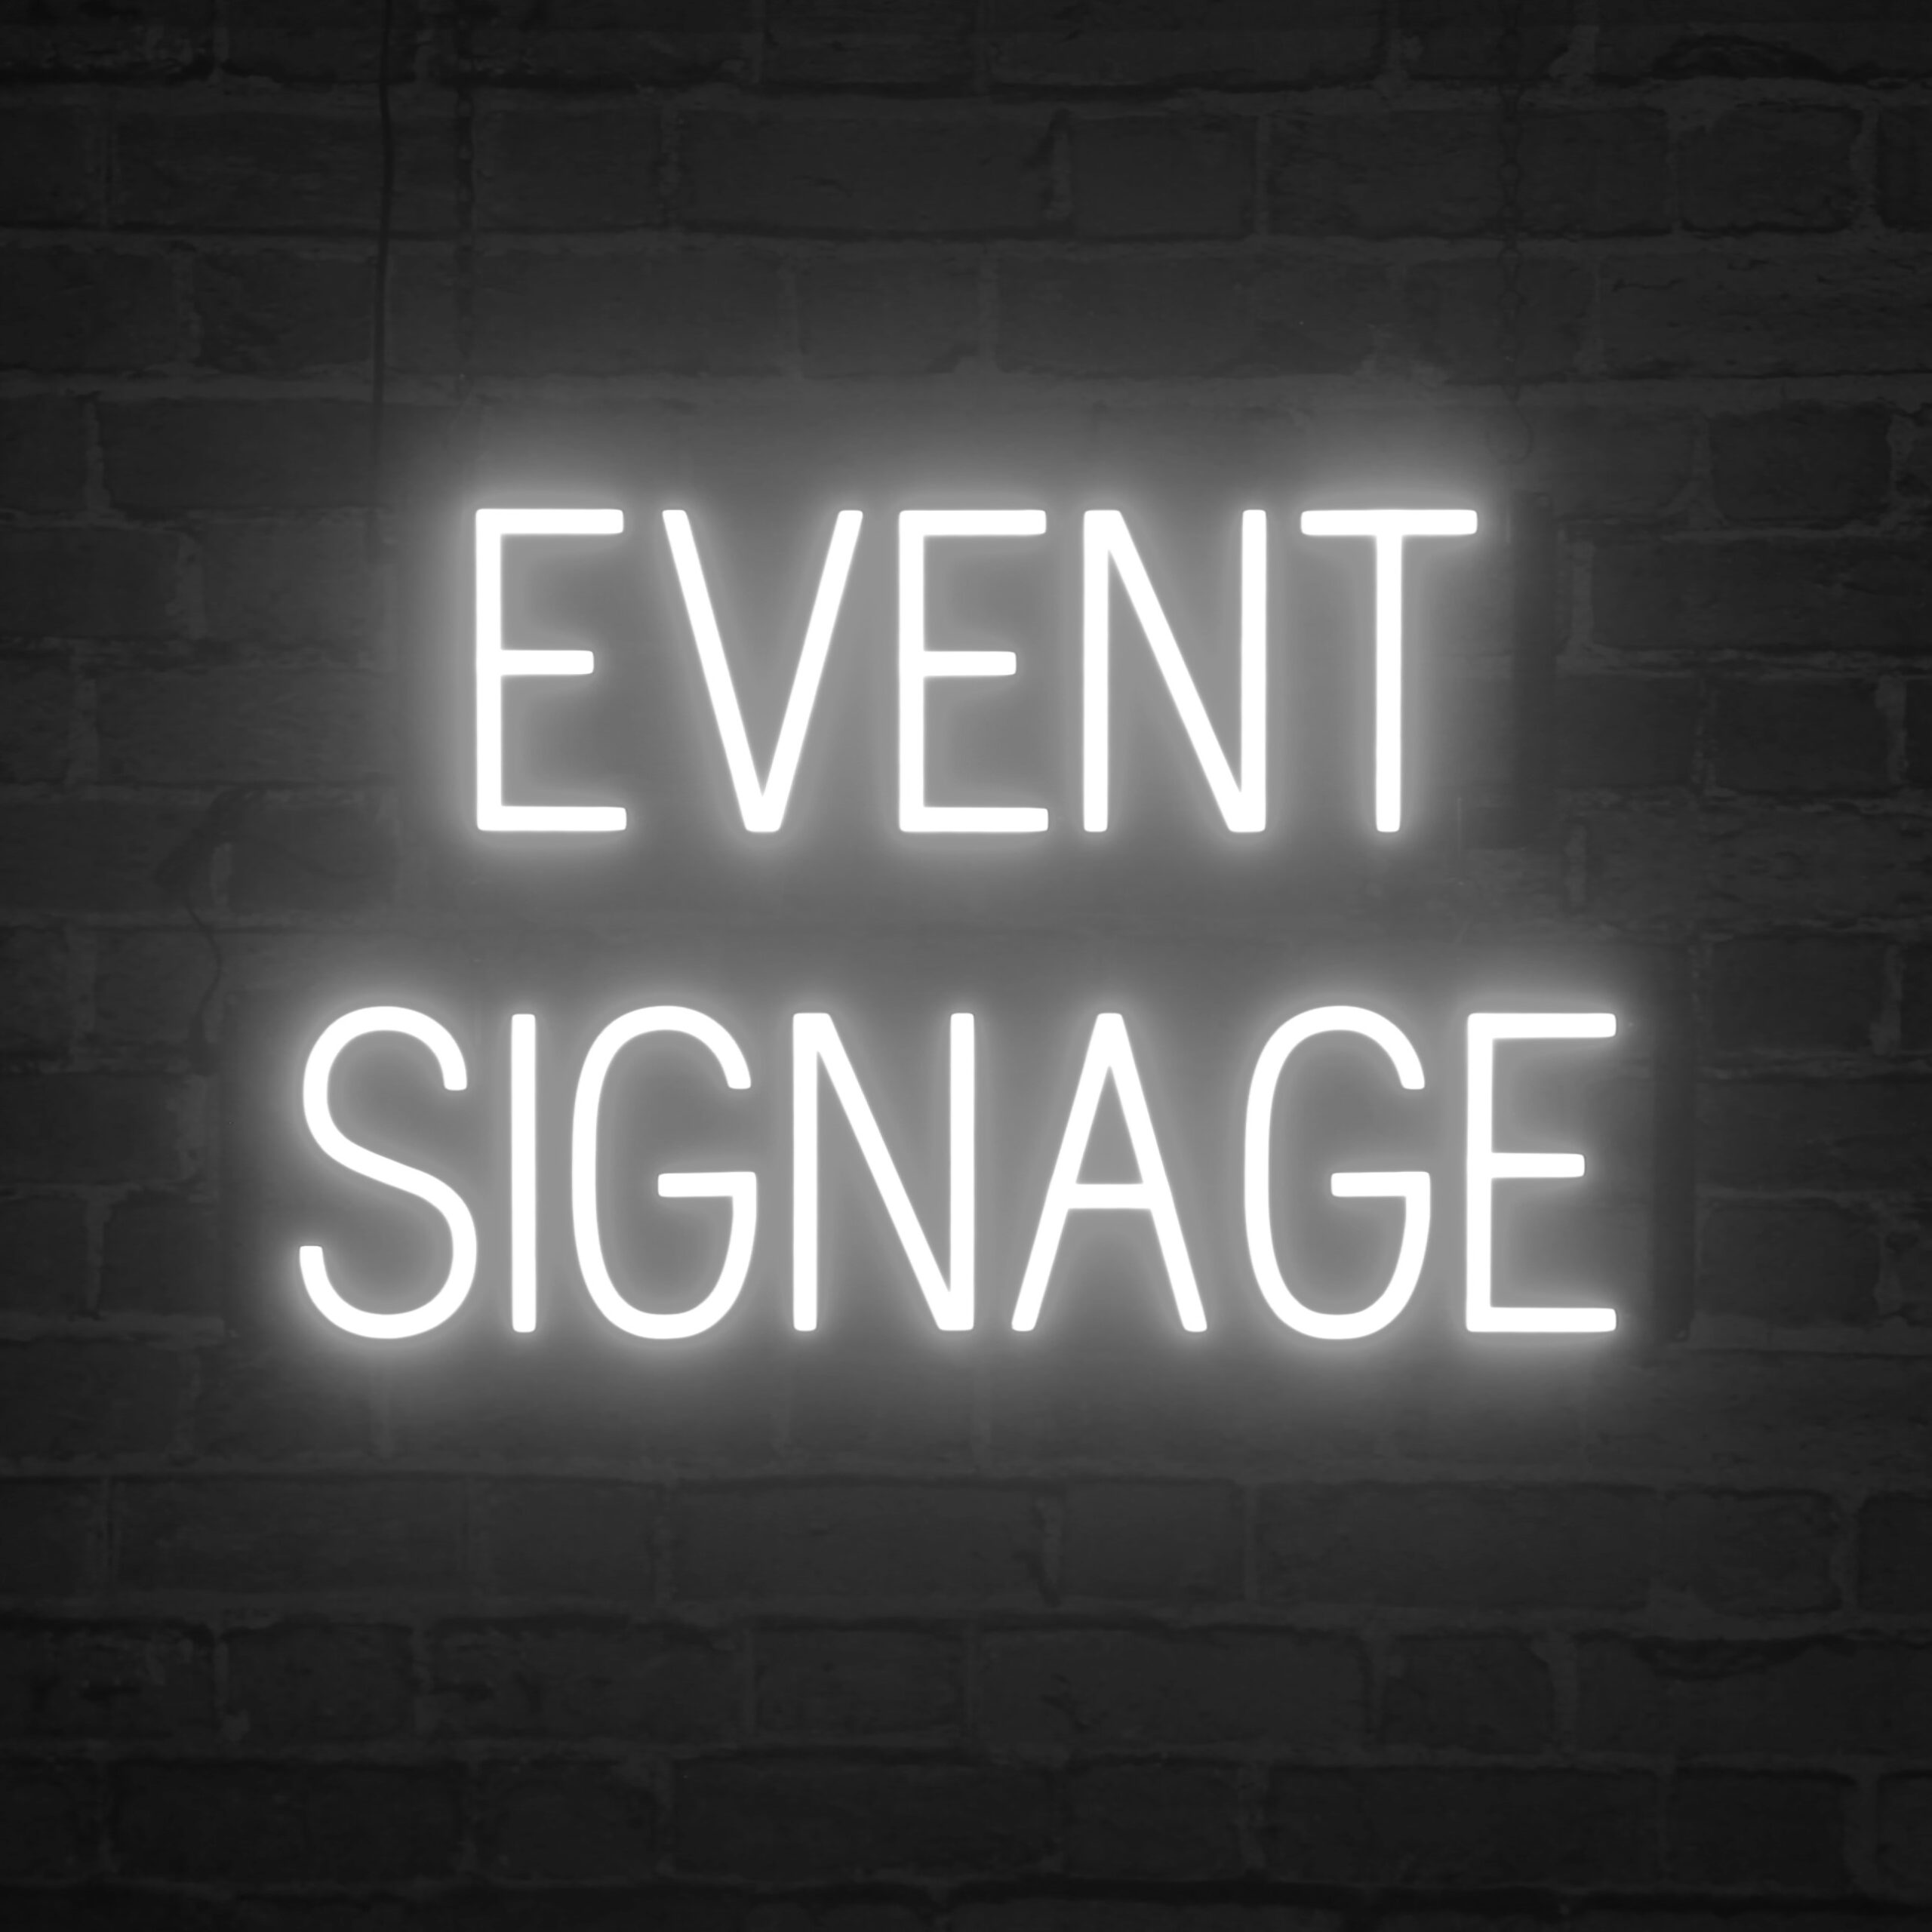 Event Signage, Custom Image of SpellBrite’s Changeable Event Signage Ideas